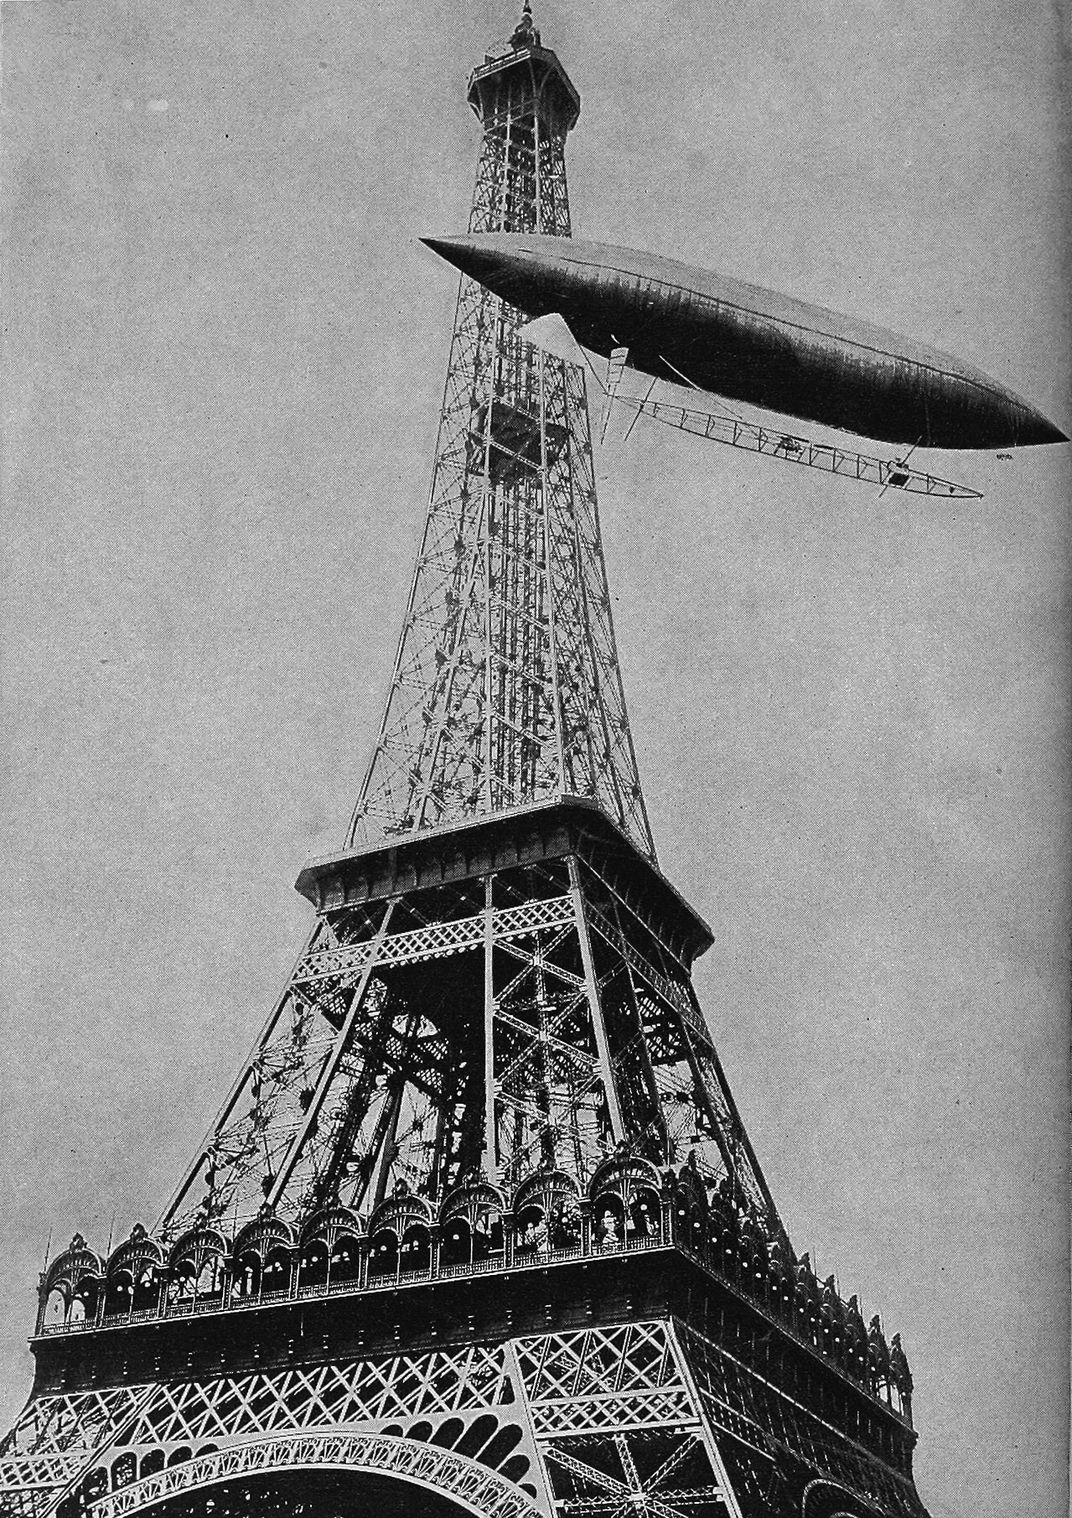 Santos-Dumont circles the Eiffel Tower in an airship on July 13, 1901.